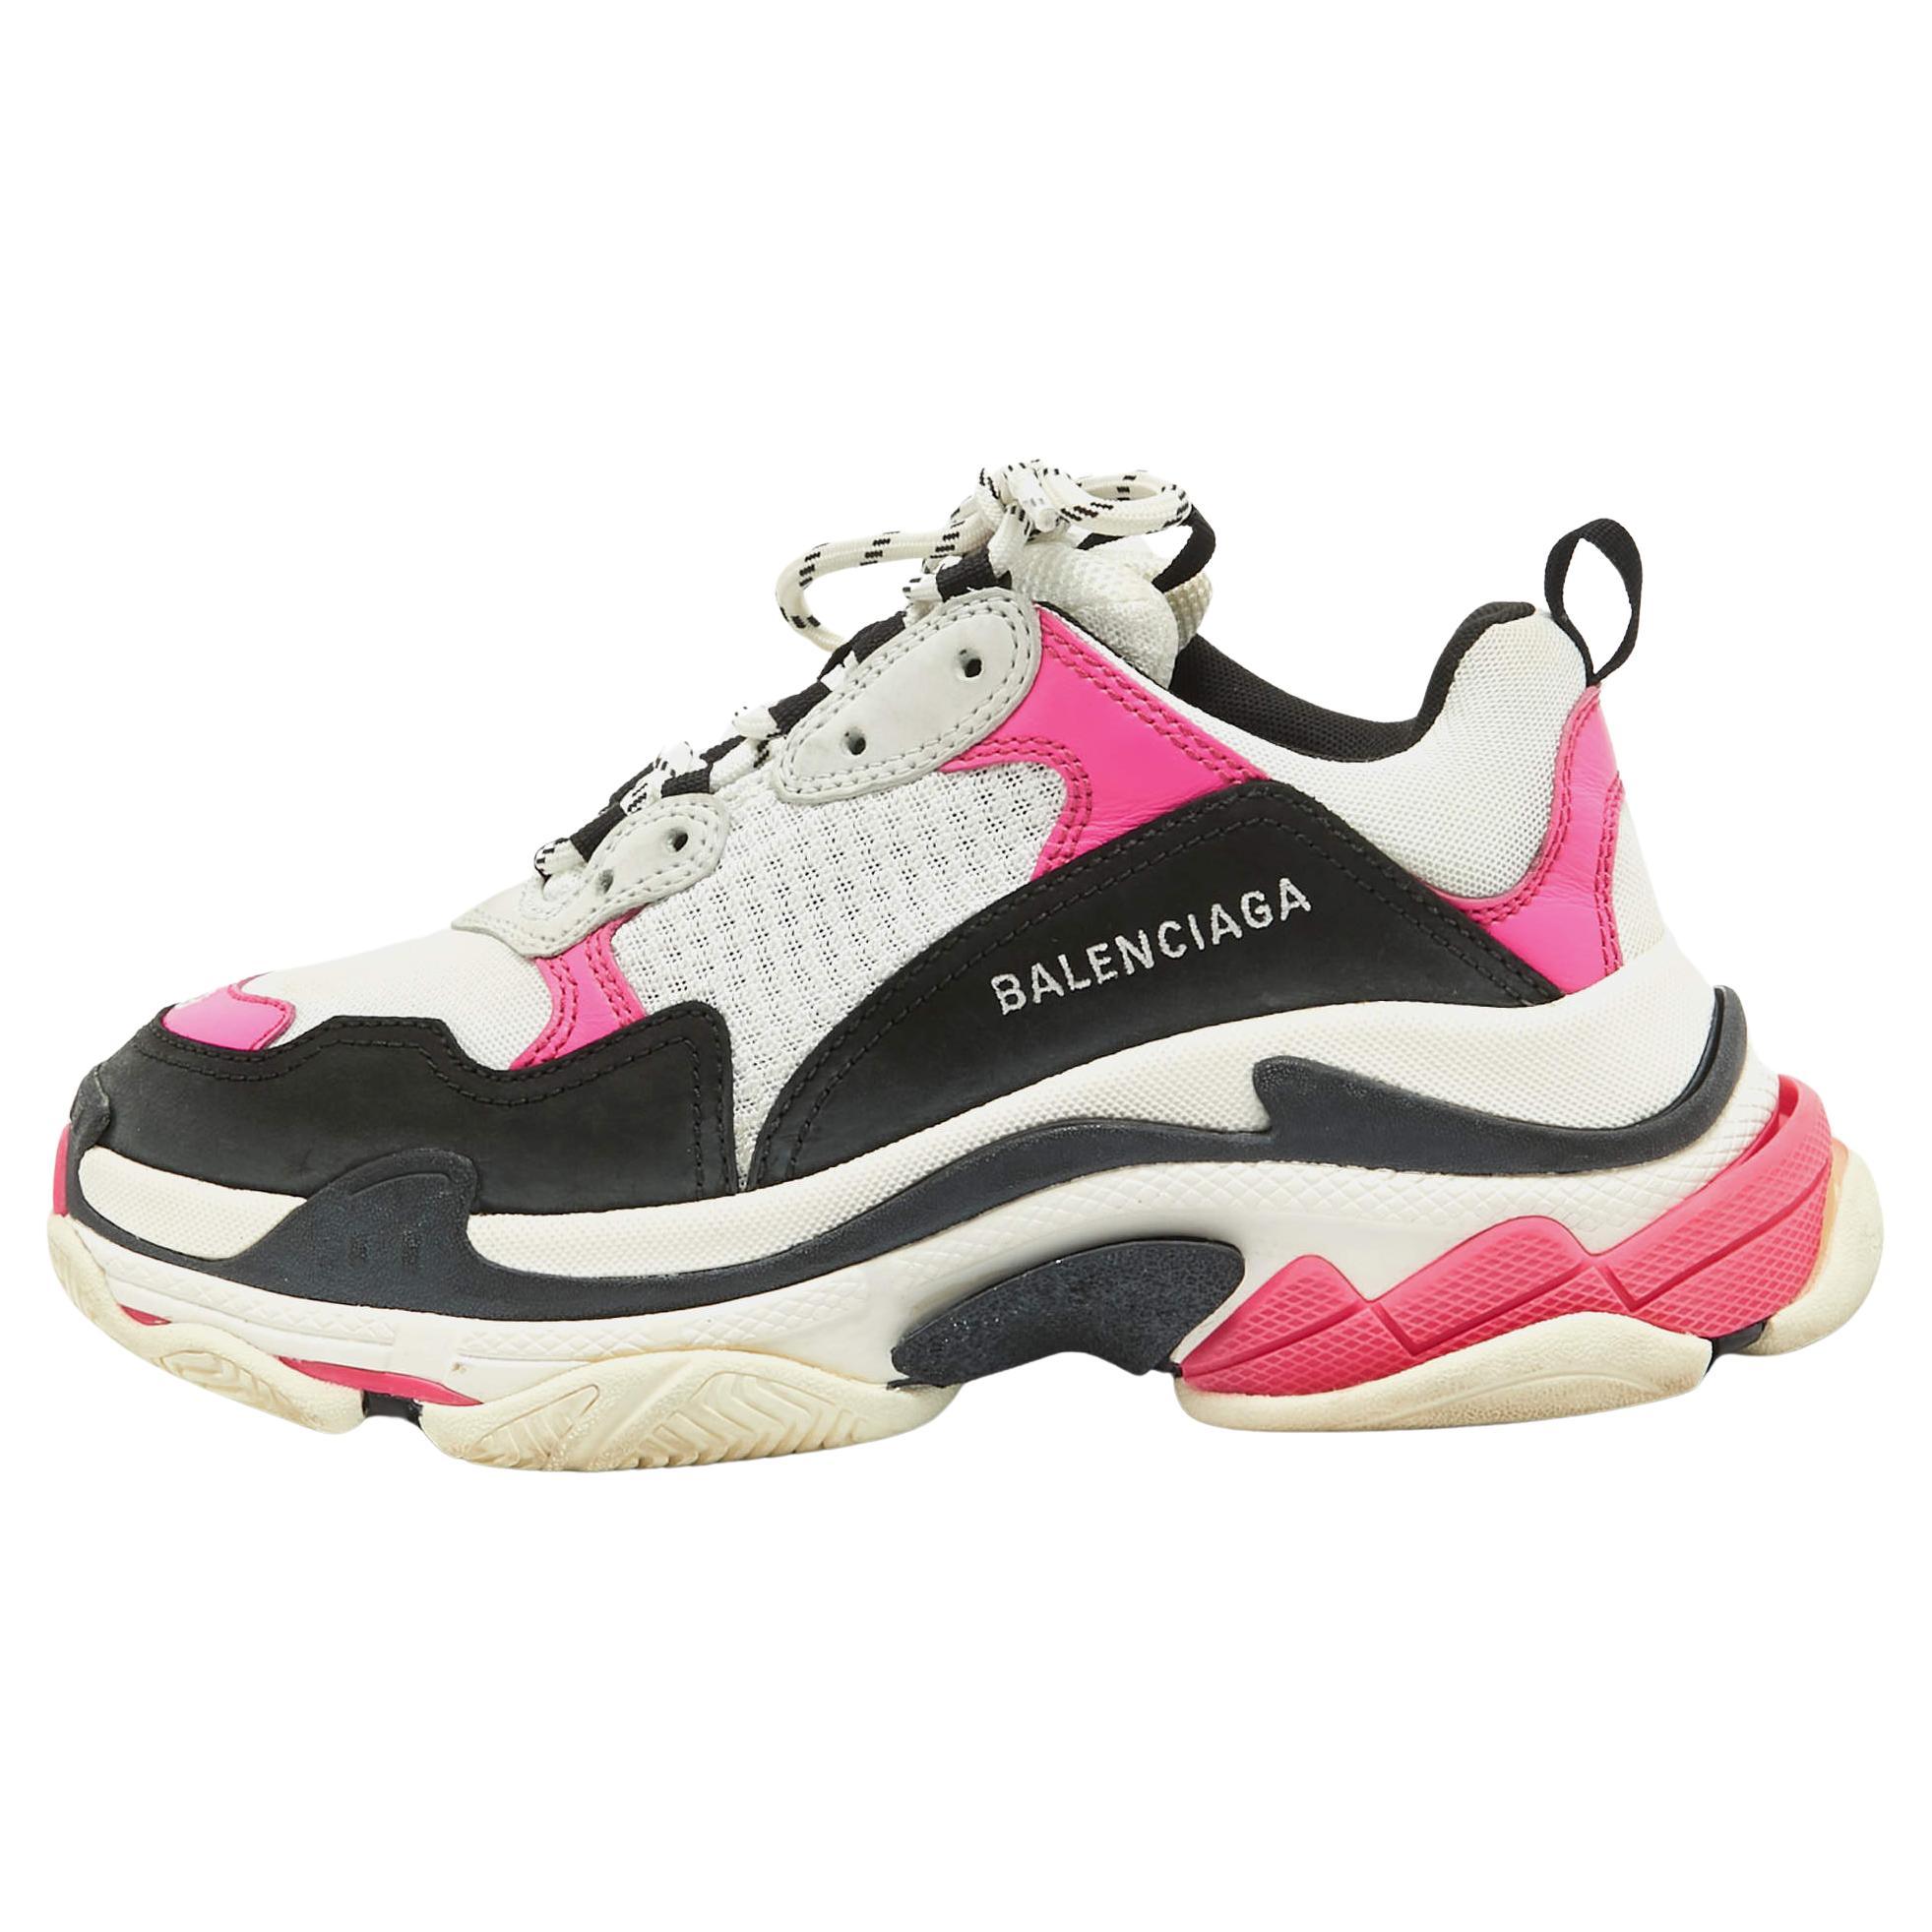 Balenciaga Multicolor Leather and Mesh Triple S Sneakers Size 39 For Sale